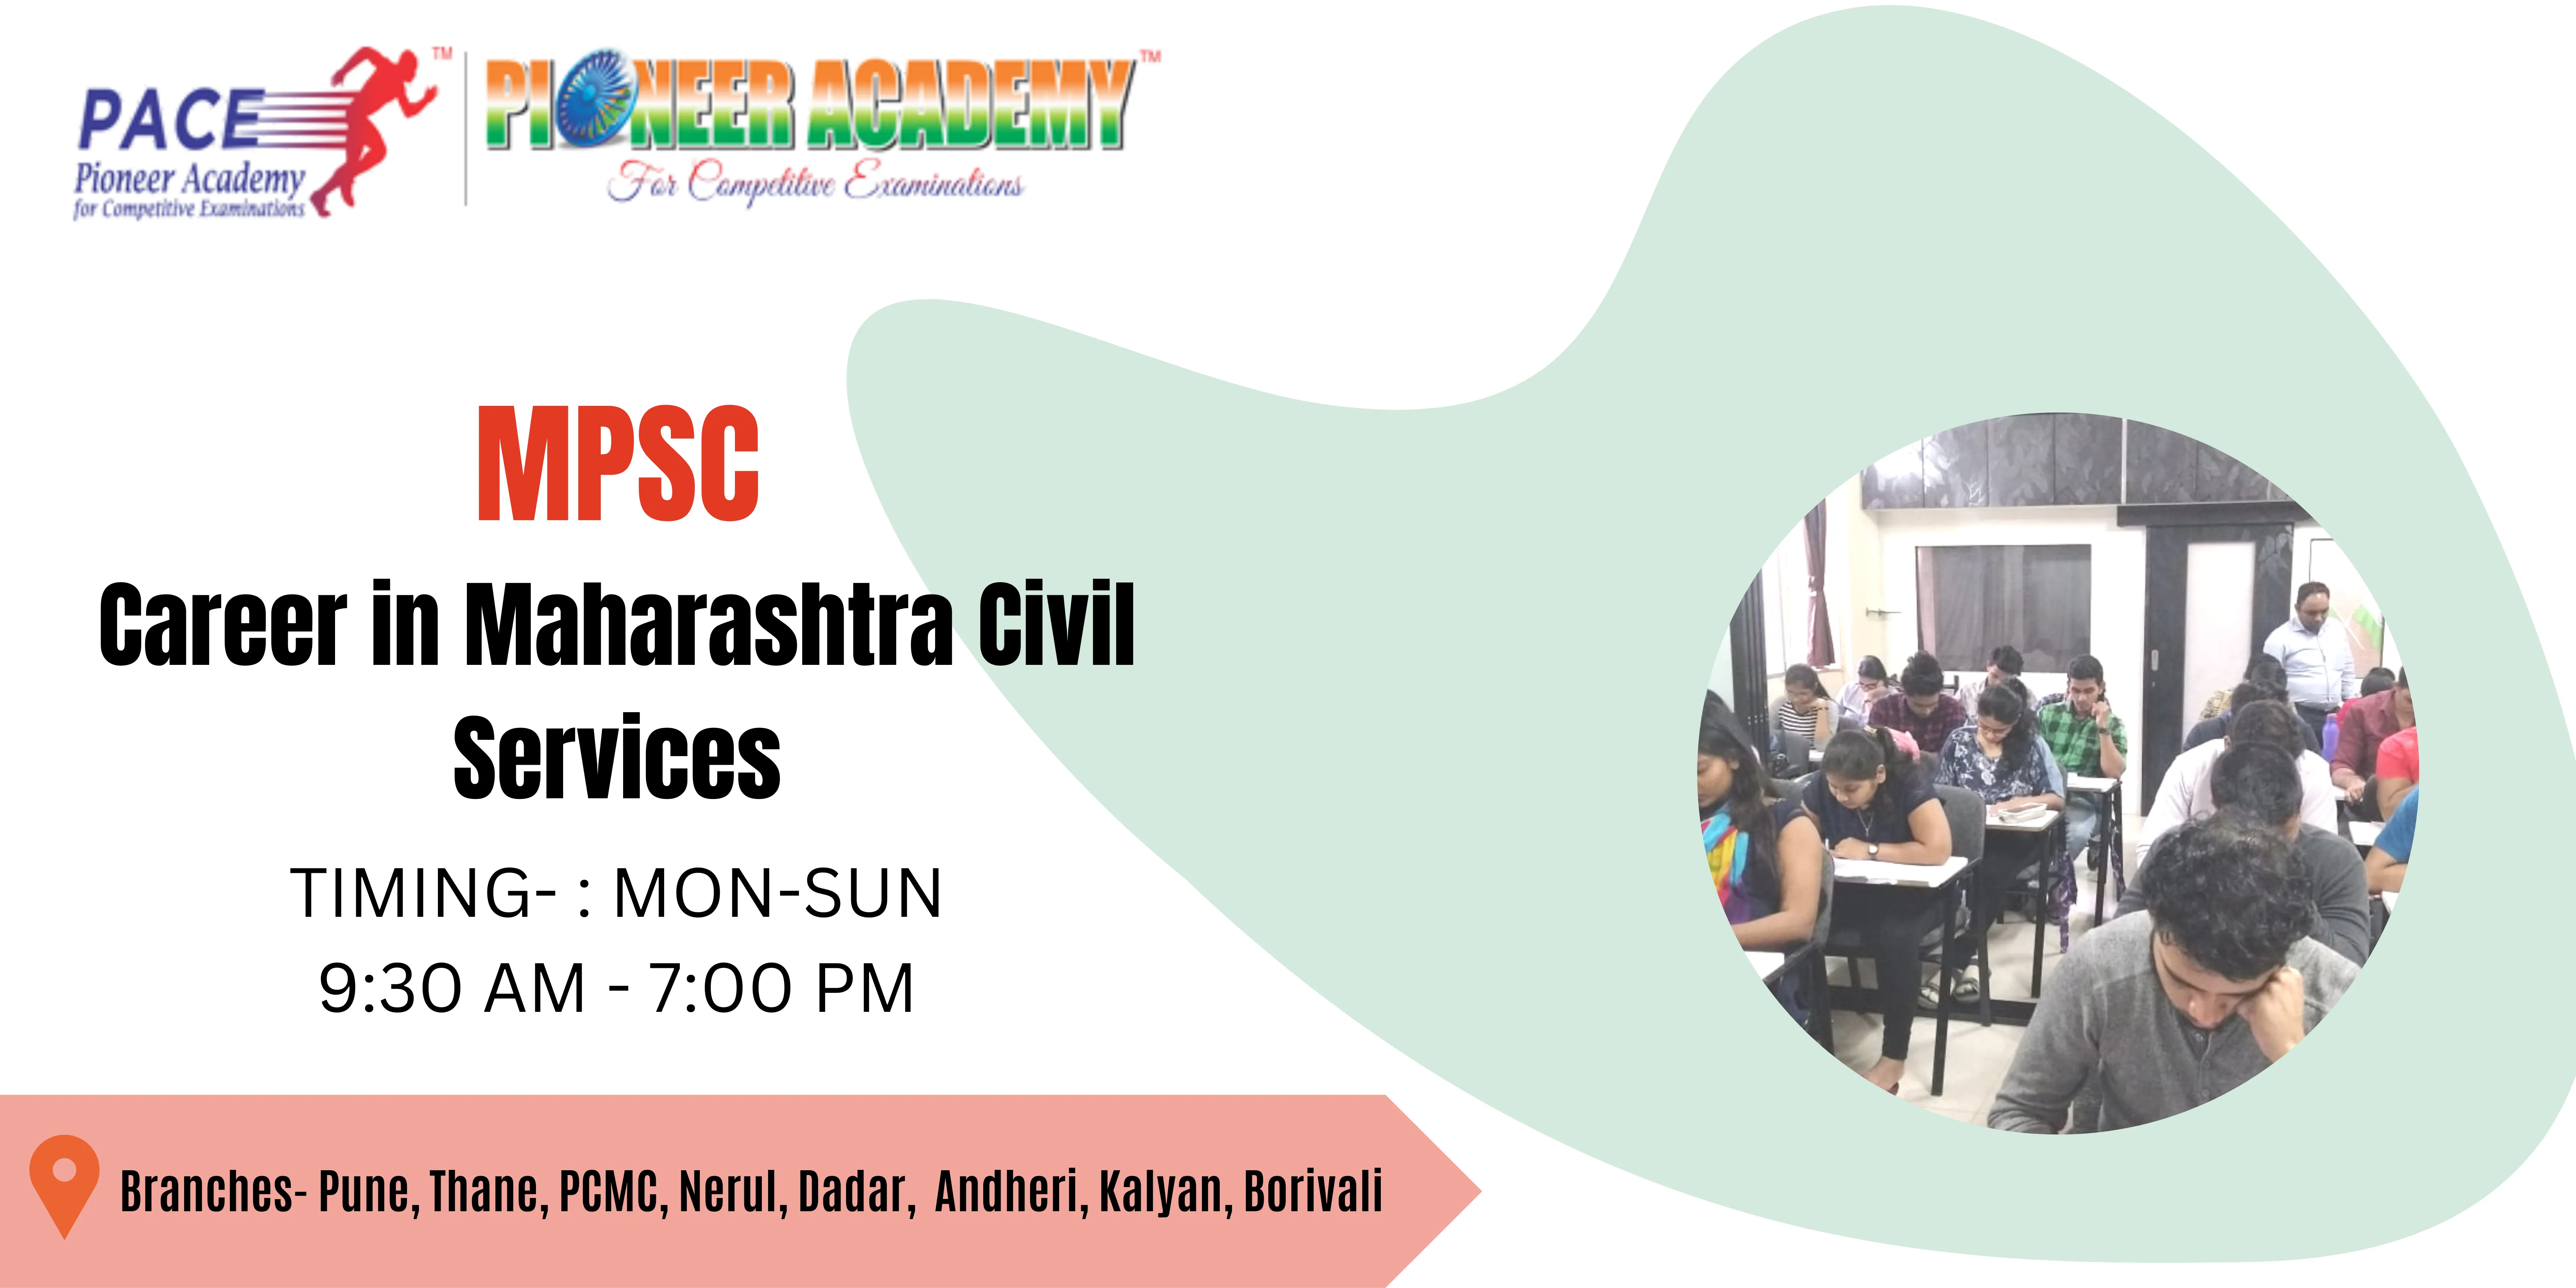 MPSC FOR A CAREER IN MAHARASHTRA CIVIL SERVICES